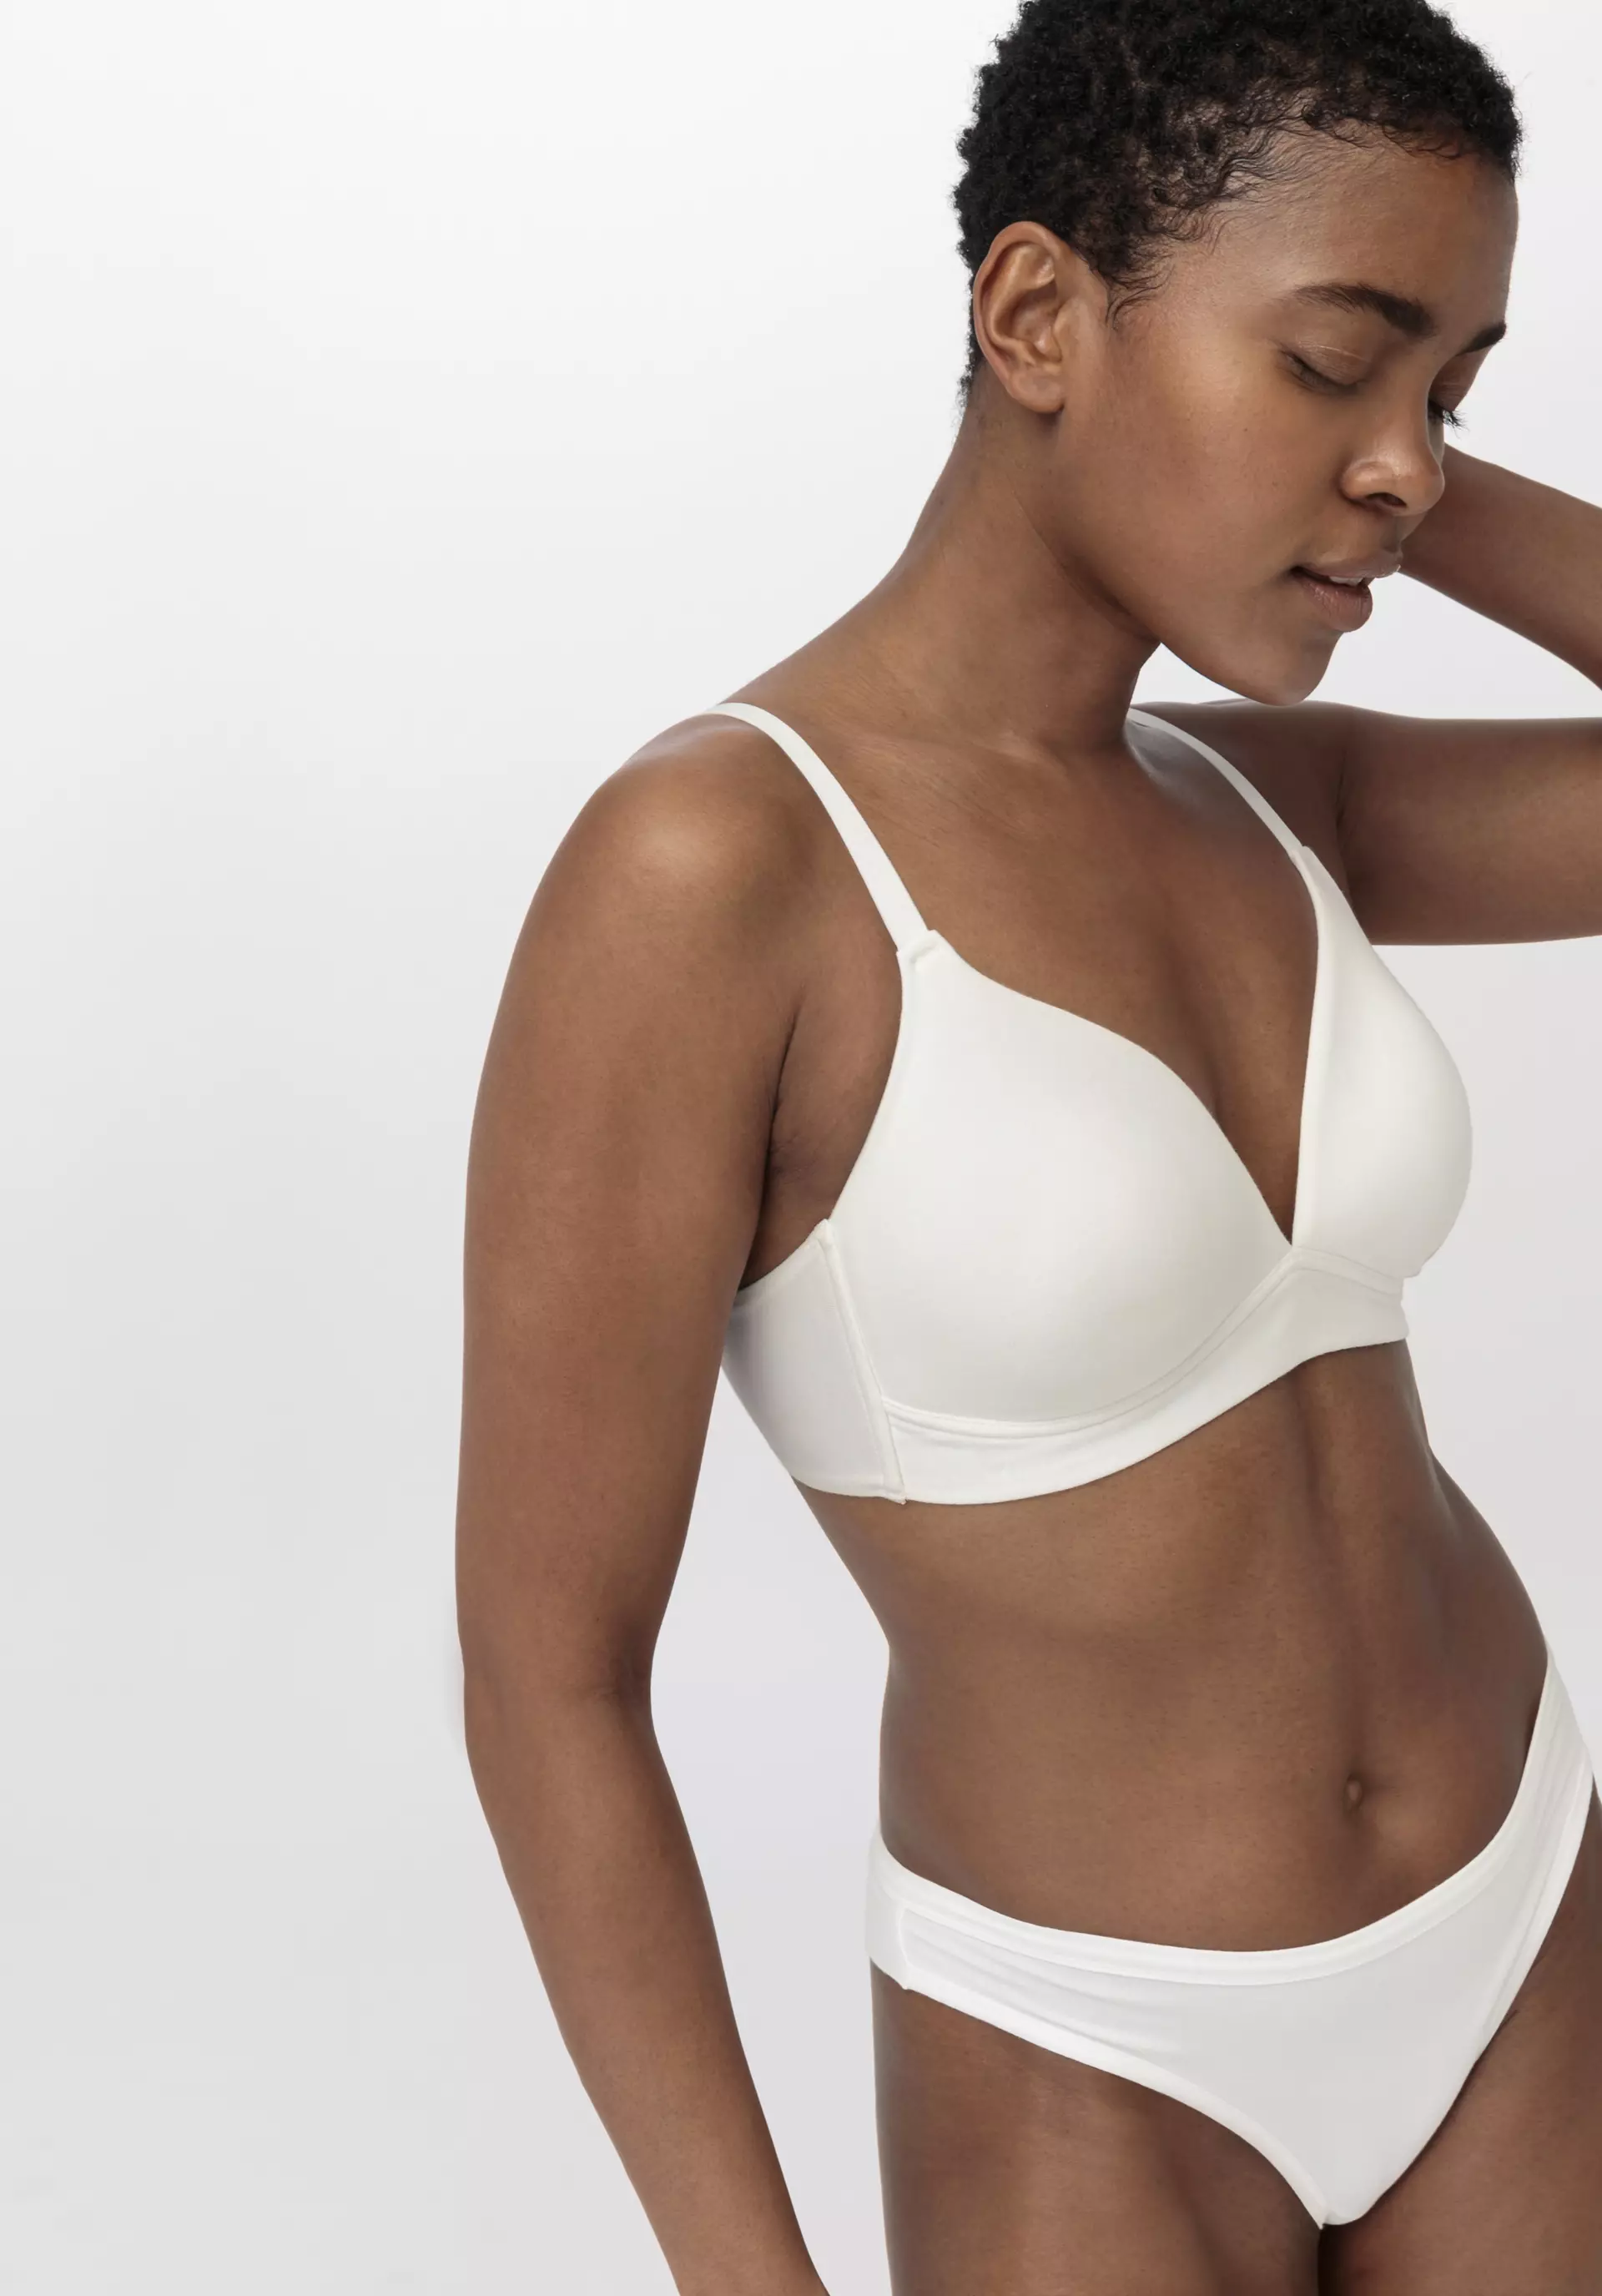 Metal-free spacer bra made of organic cotton and TENCEL ™ Modal 4984209